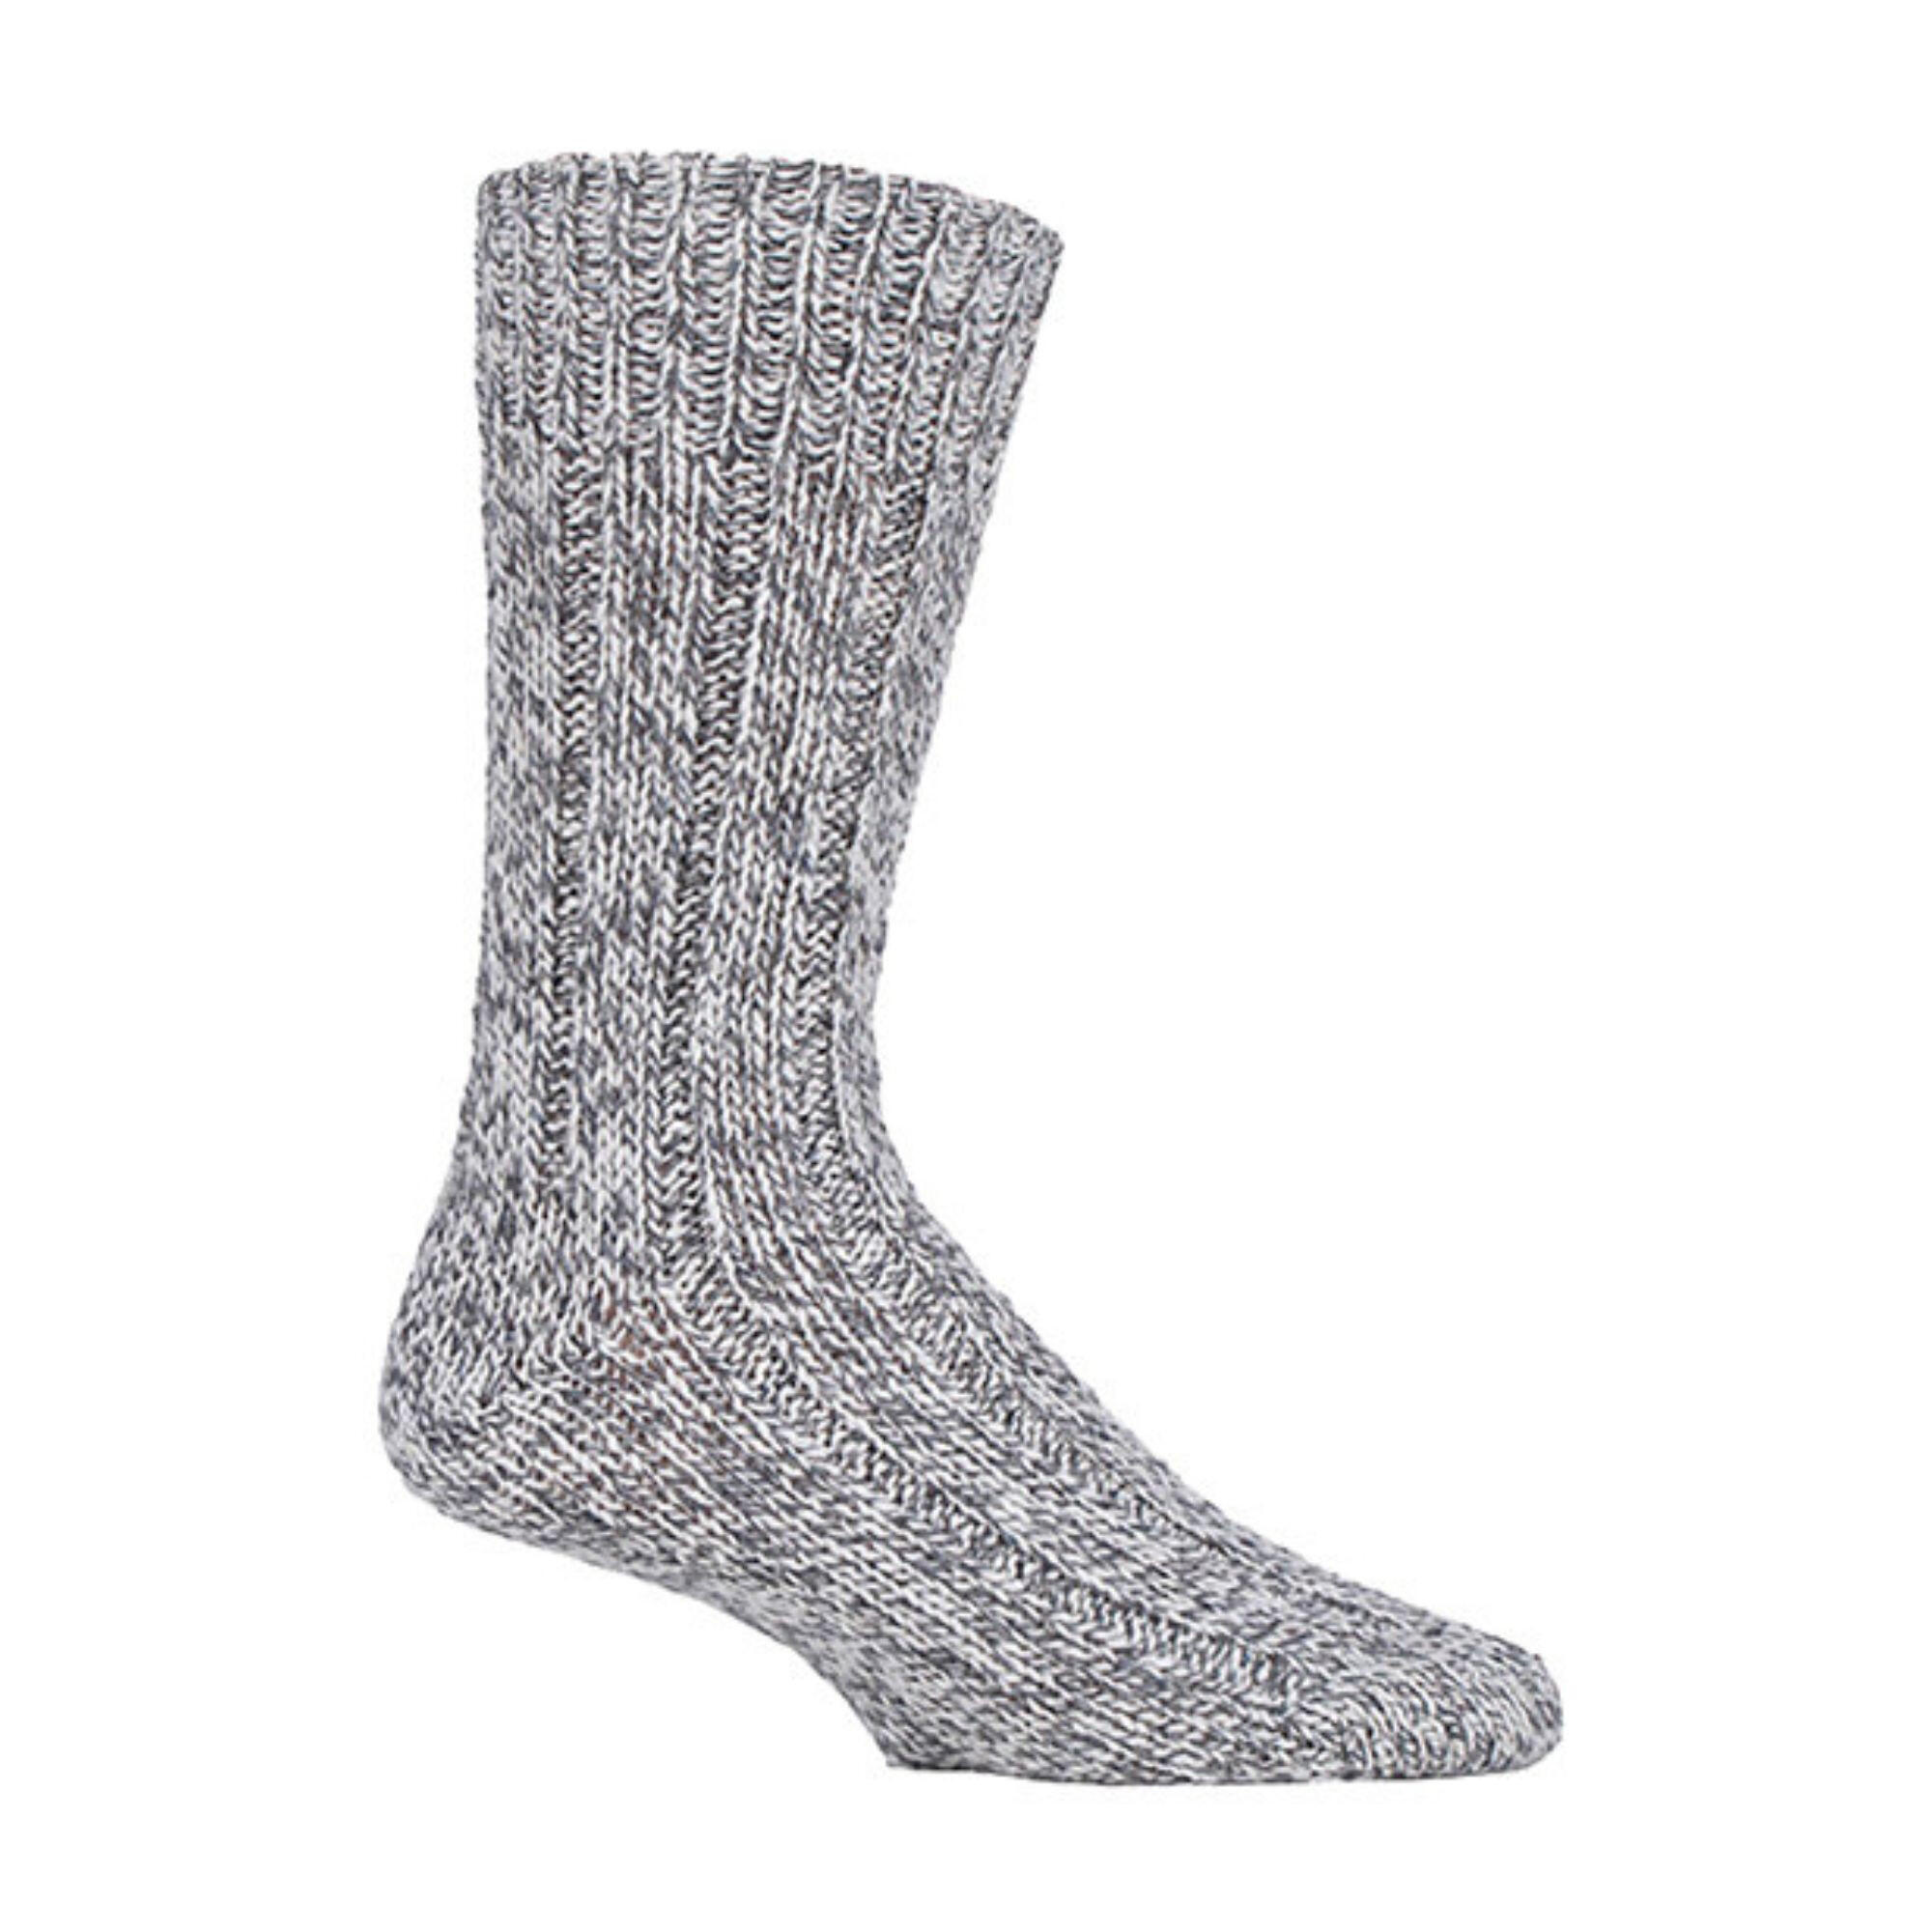 Mens Thick Heavy Kntted Wool Hiking Socks for Walking & Trekking 1/3